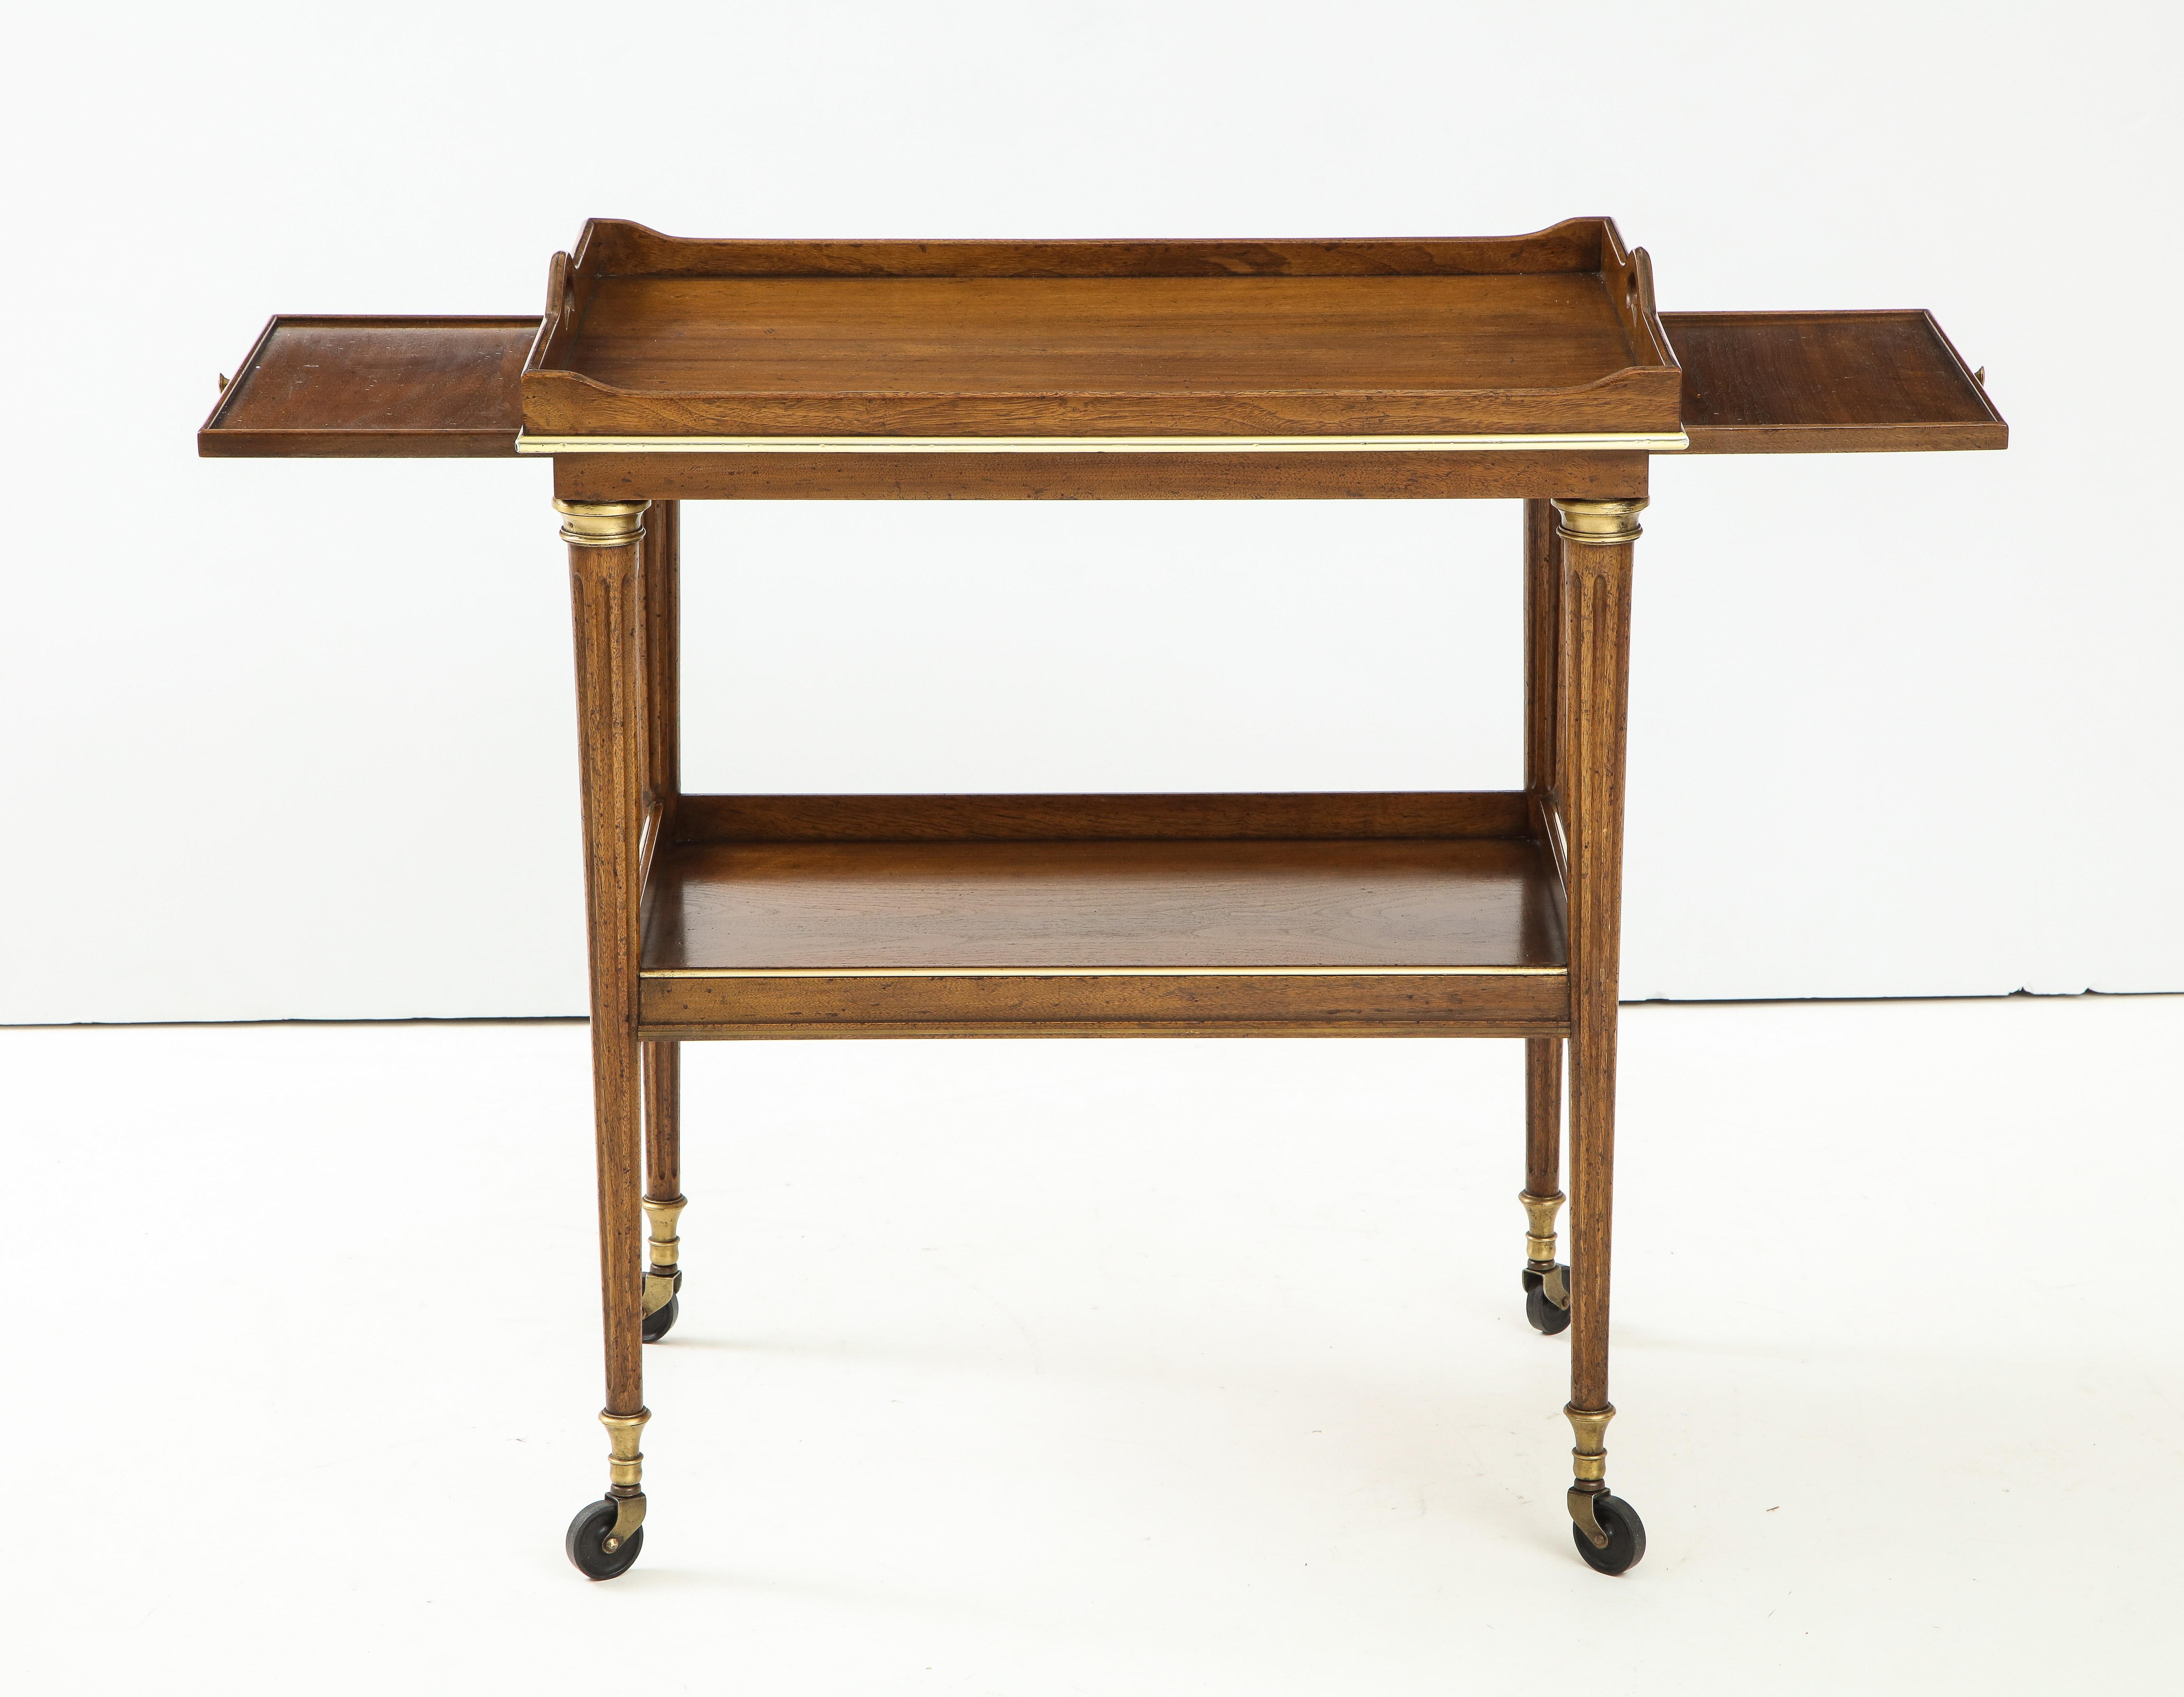 A French two tear light mahogany bar trolley with brass accents. This chic and unique piece has reeded tapered legs on castors and two pullout trays. It's small scale makes it ideal for any space or occasion!